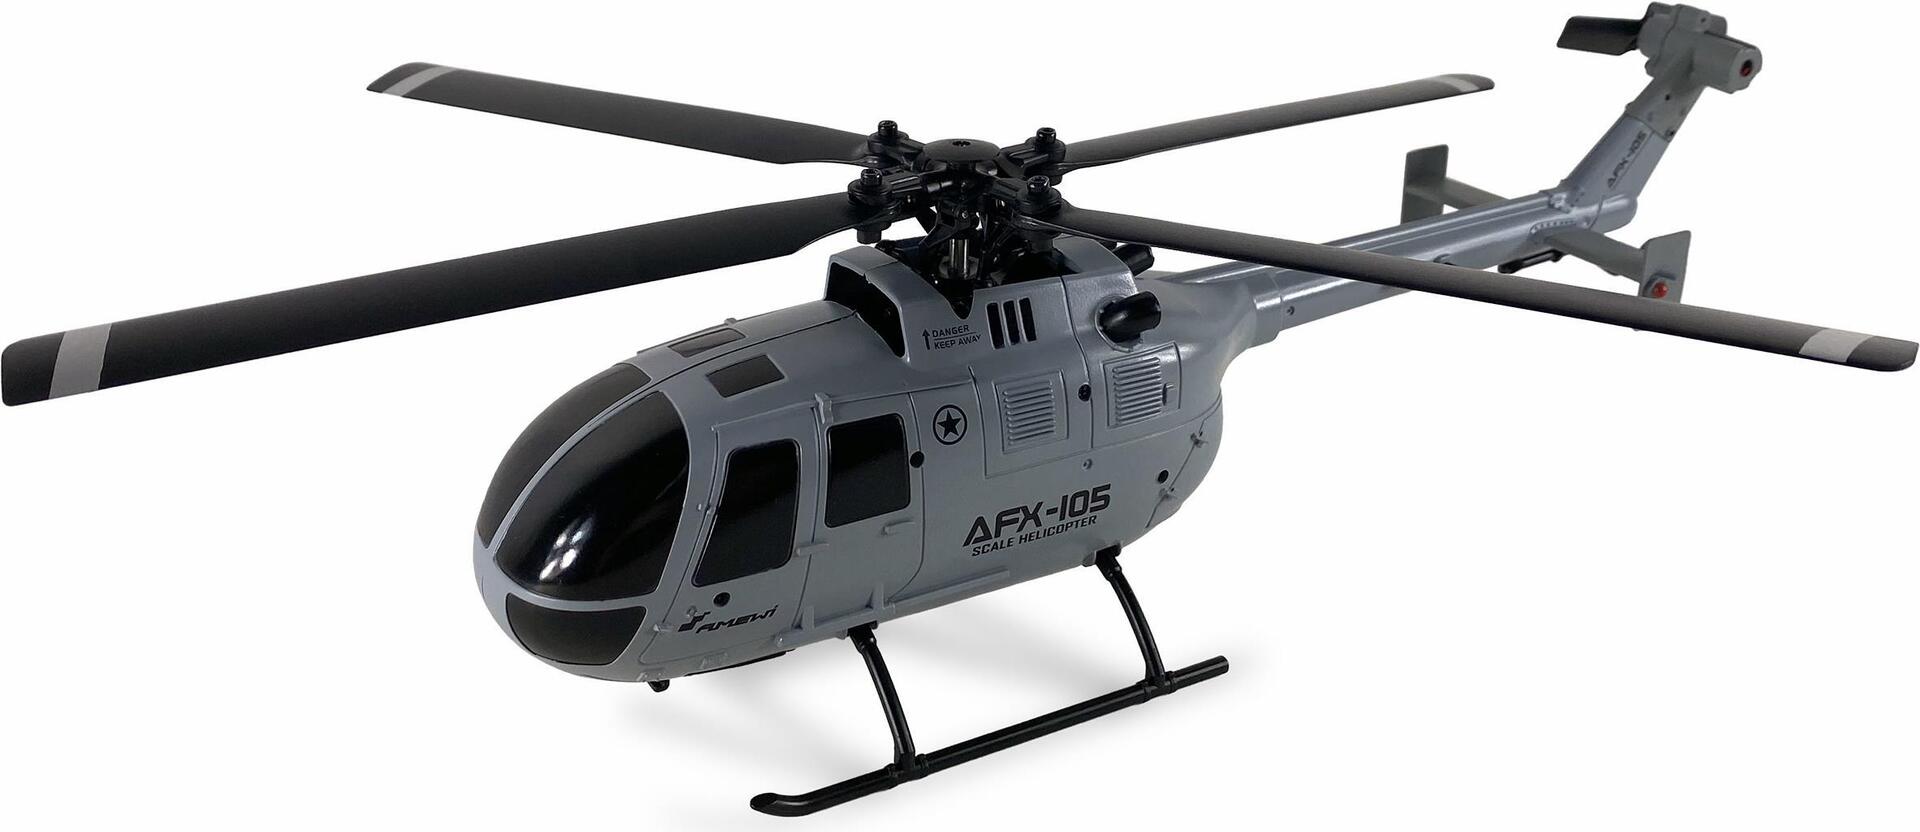 Amewi AFX-105 Radio-Controlled (RC) VTOL (Vertical Take Off and Landing) aircraft (25319)